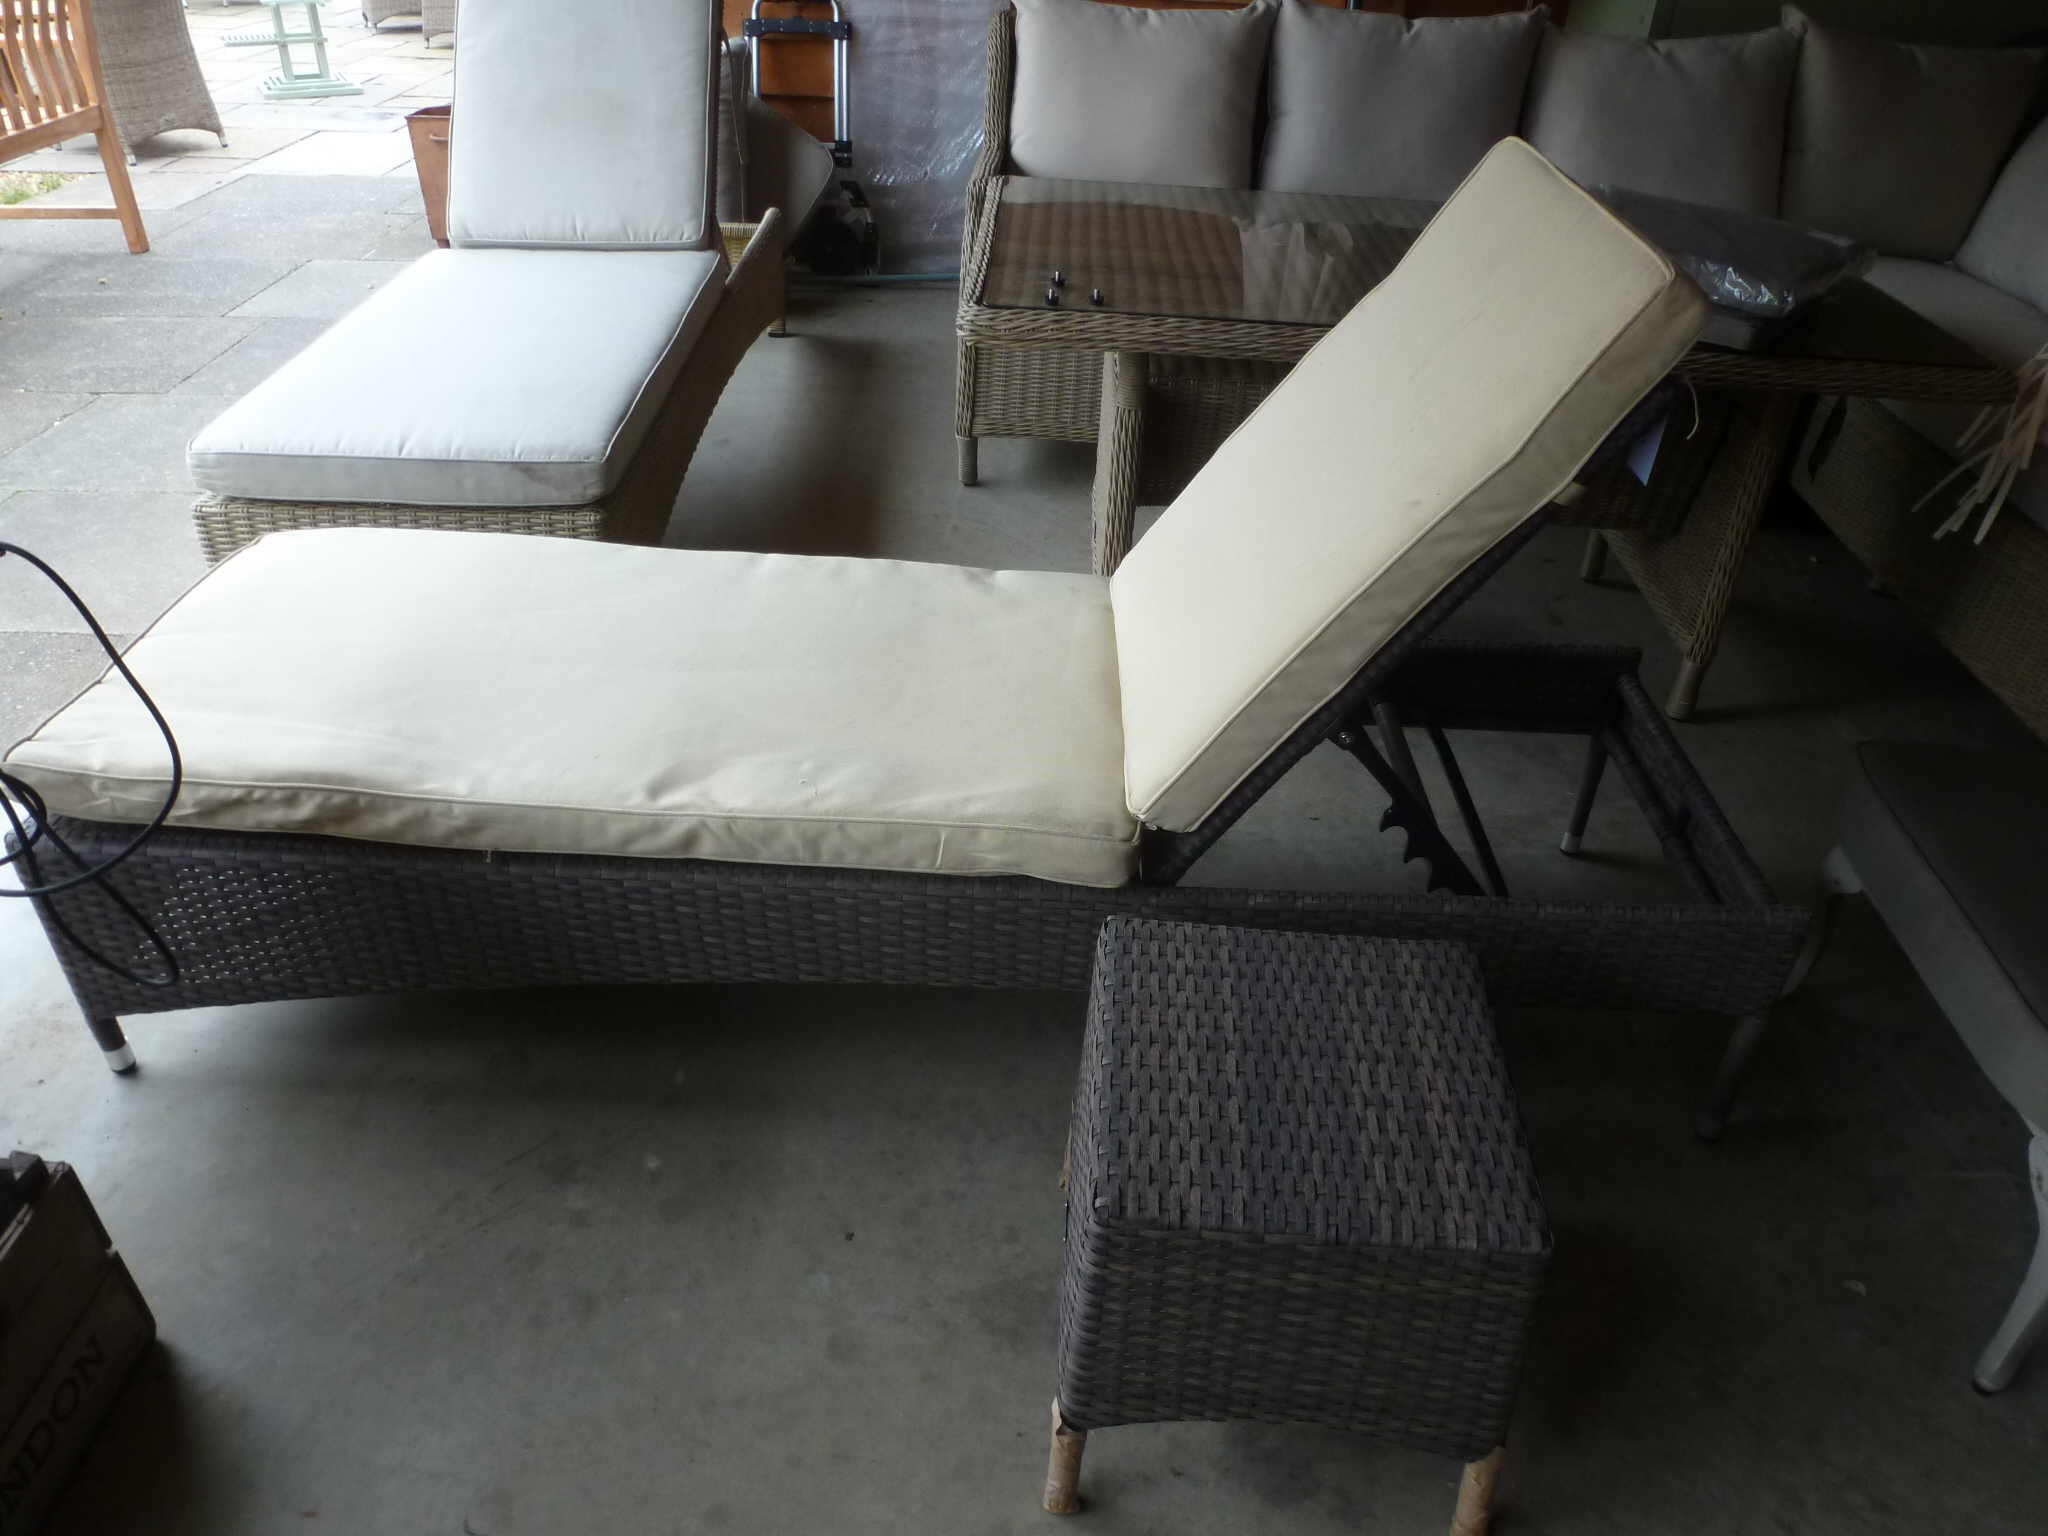 A Bramblecrest Rio lounger with coffee table